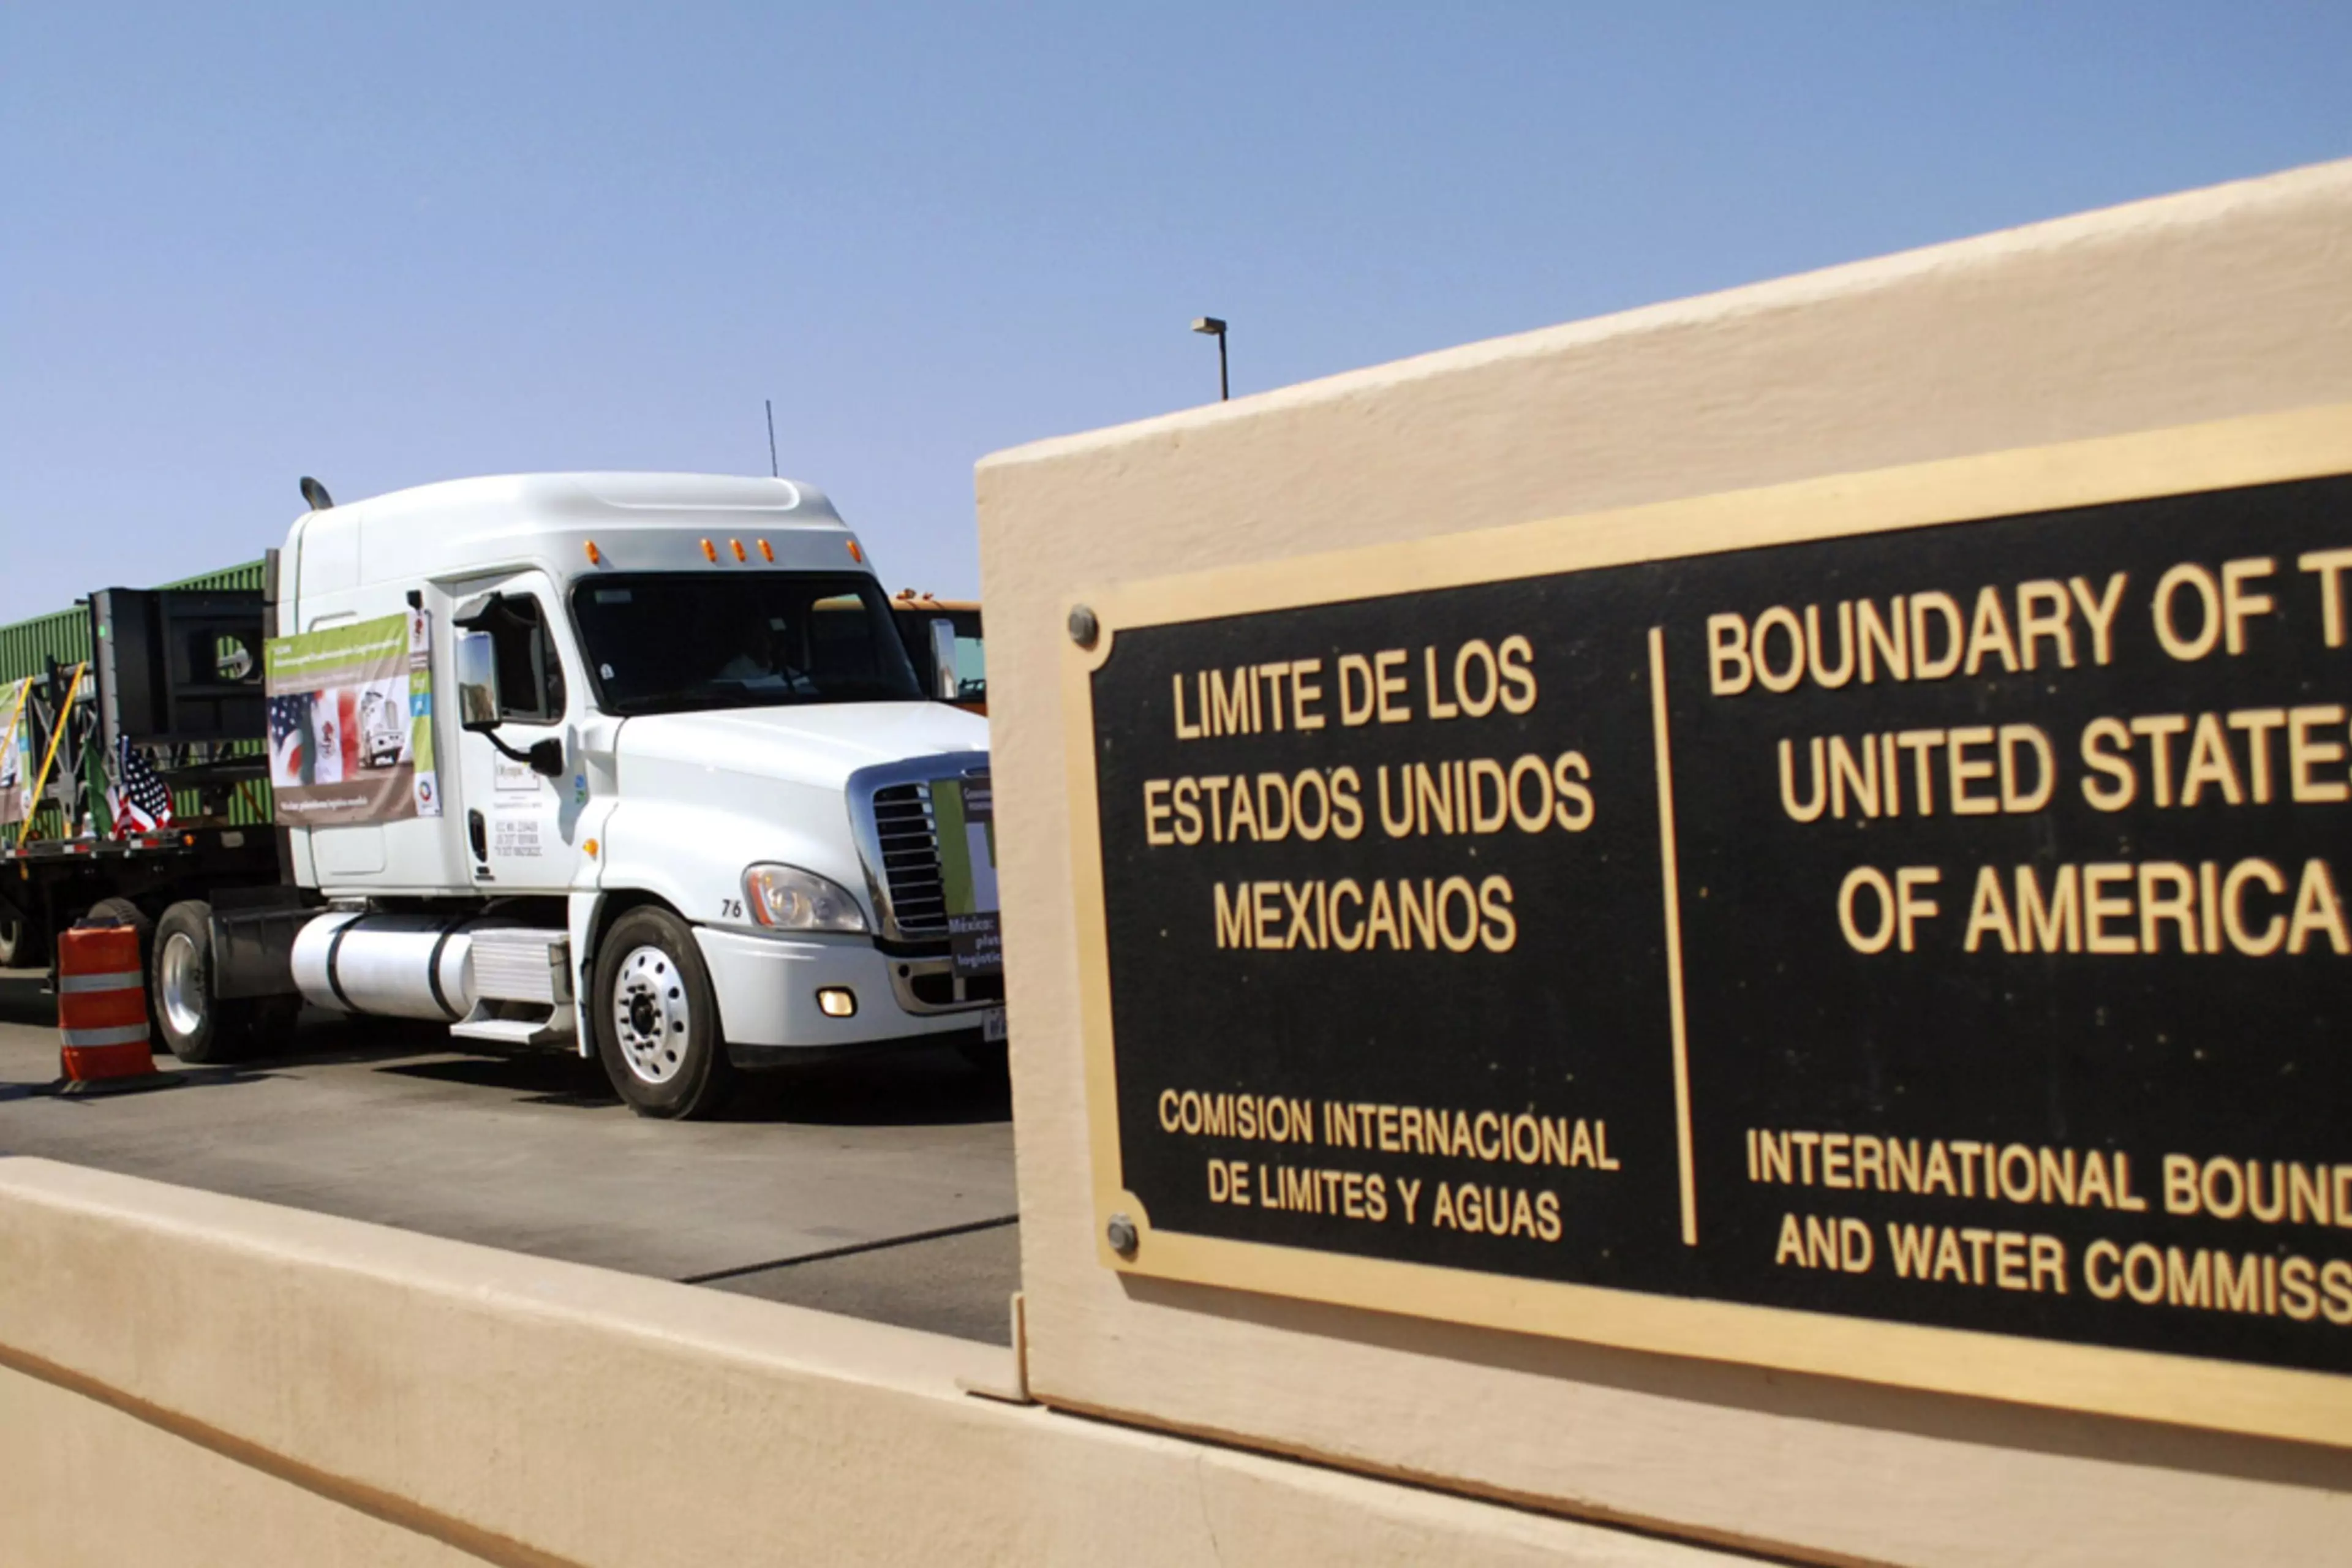 Mexican commercial trucks cross the border into the United States at Laredo, Texas.